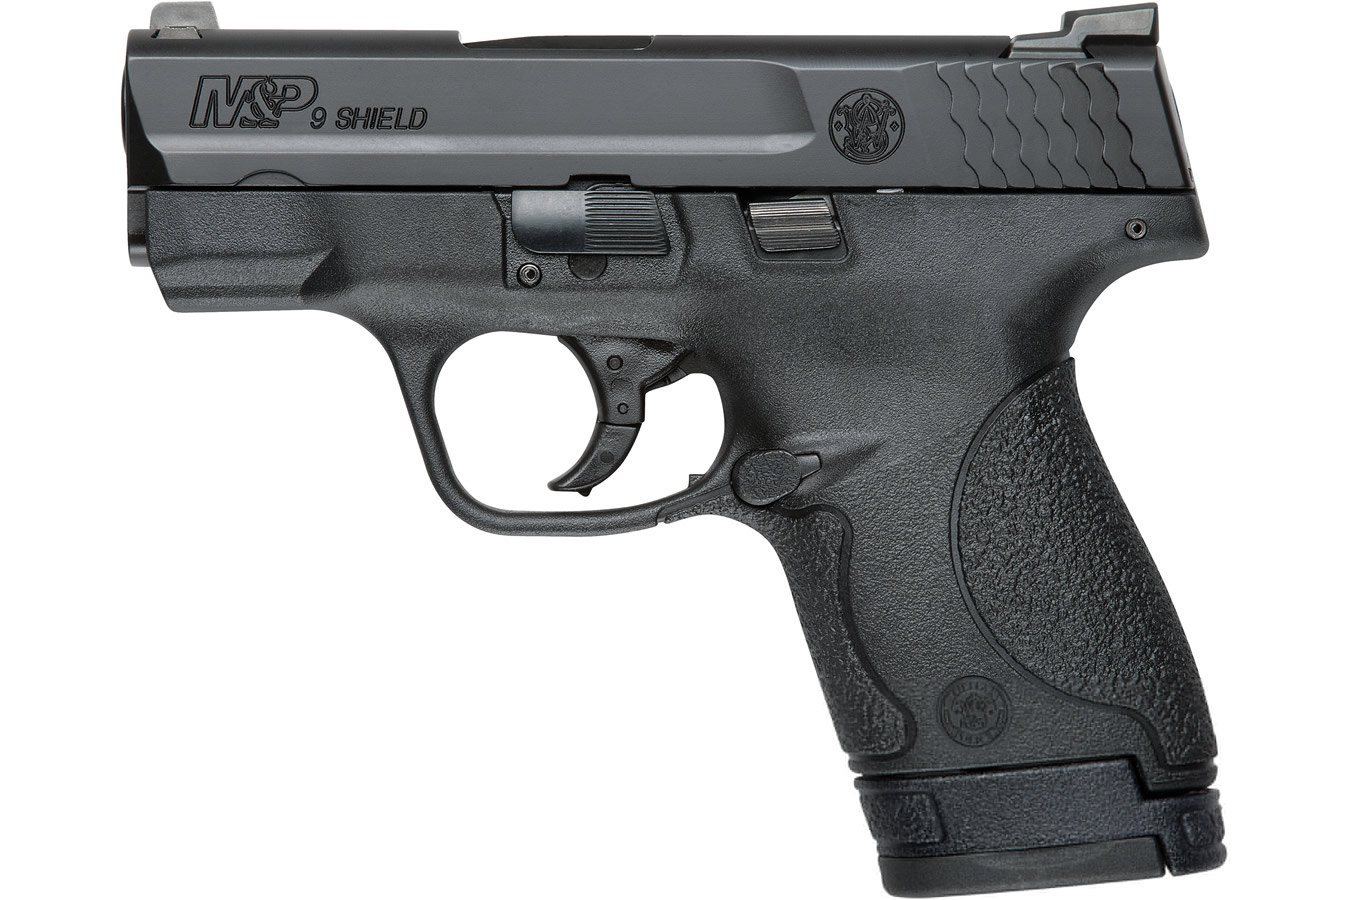 SMITH AND WESSON MP9 SHIELD 9MM WITH NIGHT SIGHTS